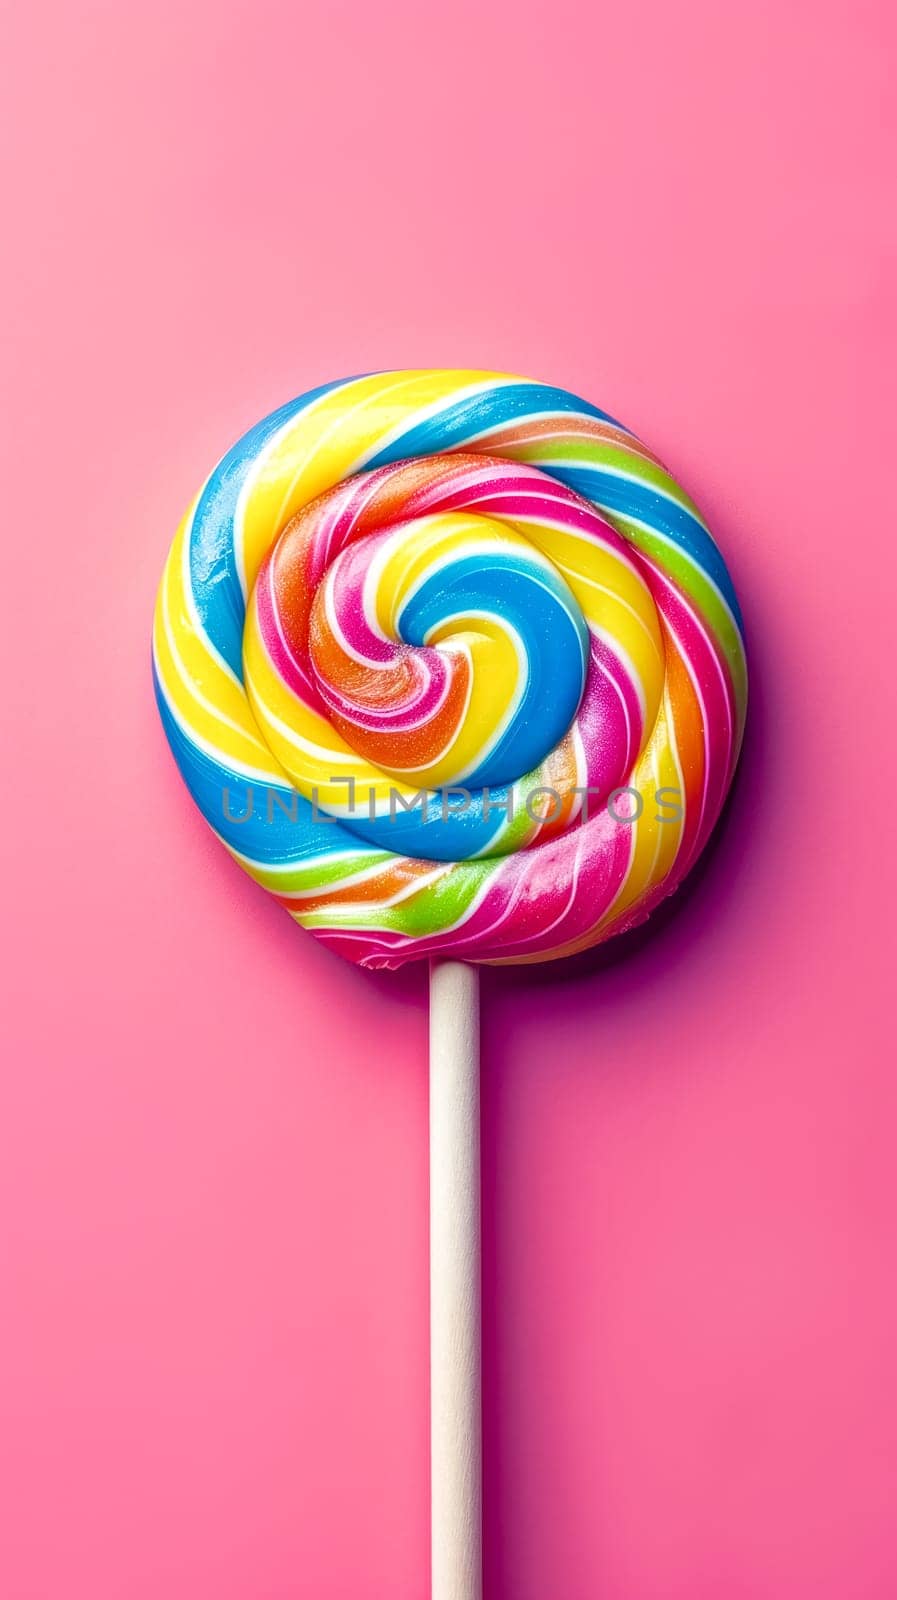 Colorful lollipop on pink background, vertical